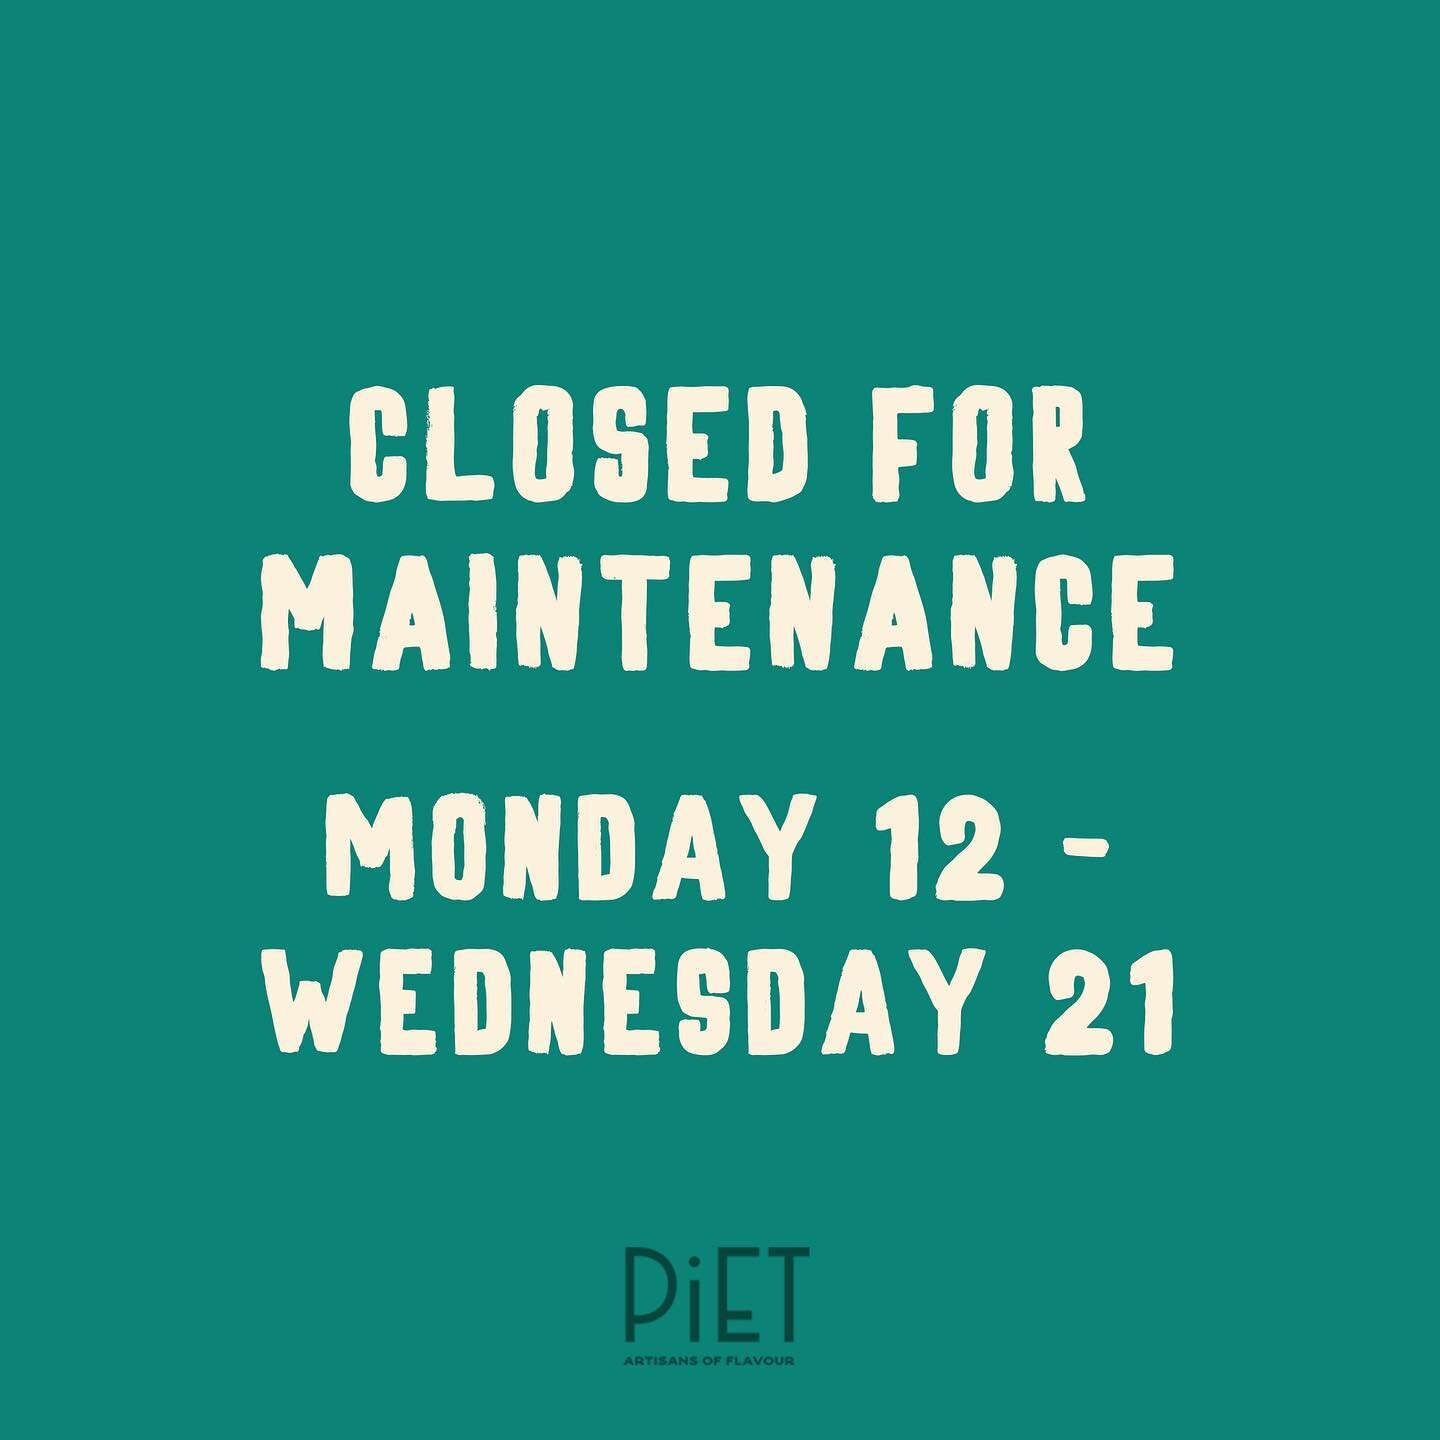 👉🏼 CLOSED FOR MAINTENANCE
👉🏼 GESLOTEN WEGEN ONDERHOUD 

⭐️ FEB 12 - FEB 21 

We are closed for a due maintenance starting this Monday! We apologize for any inconveniences this may cause! This year, and as soon as our peak season approaches, look 